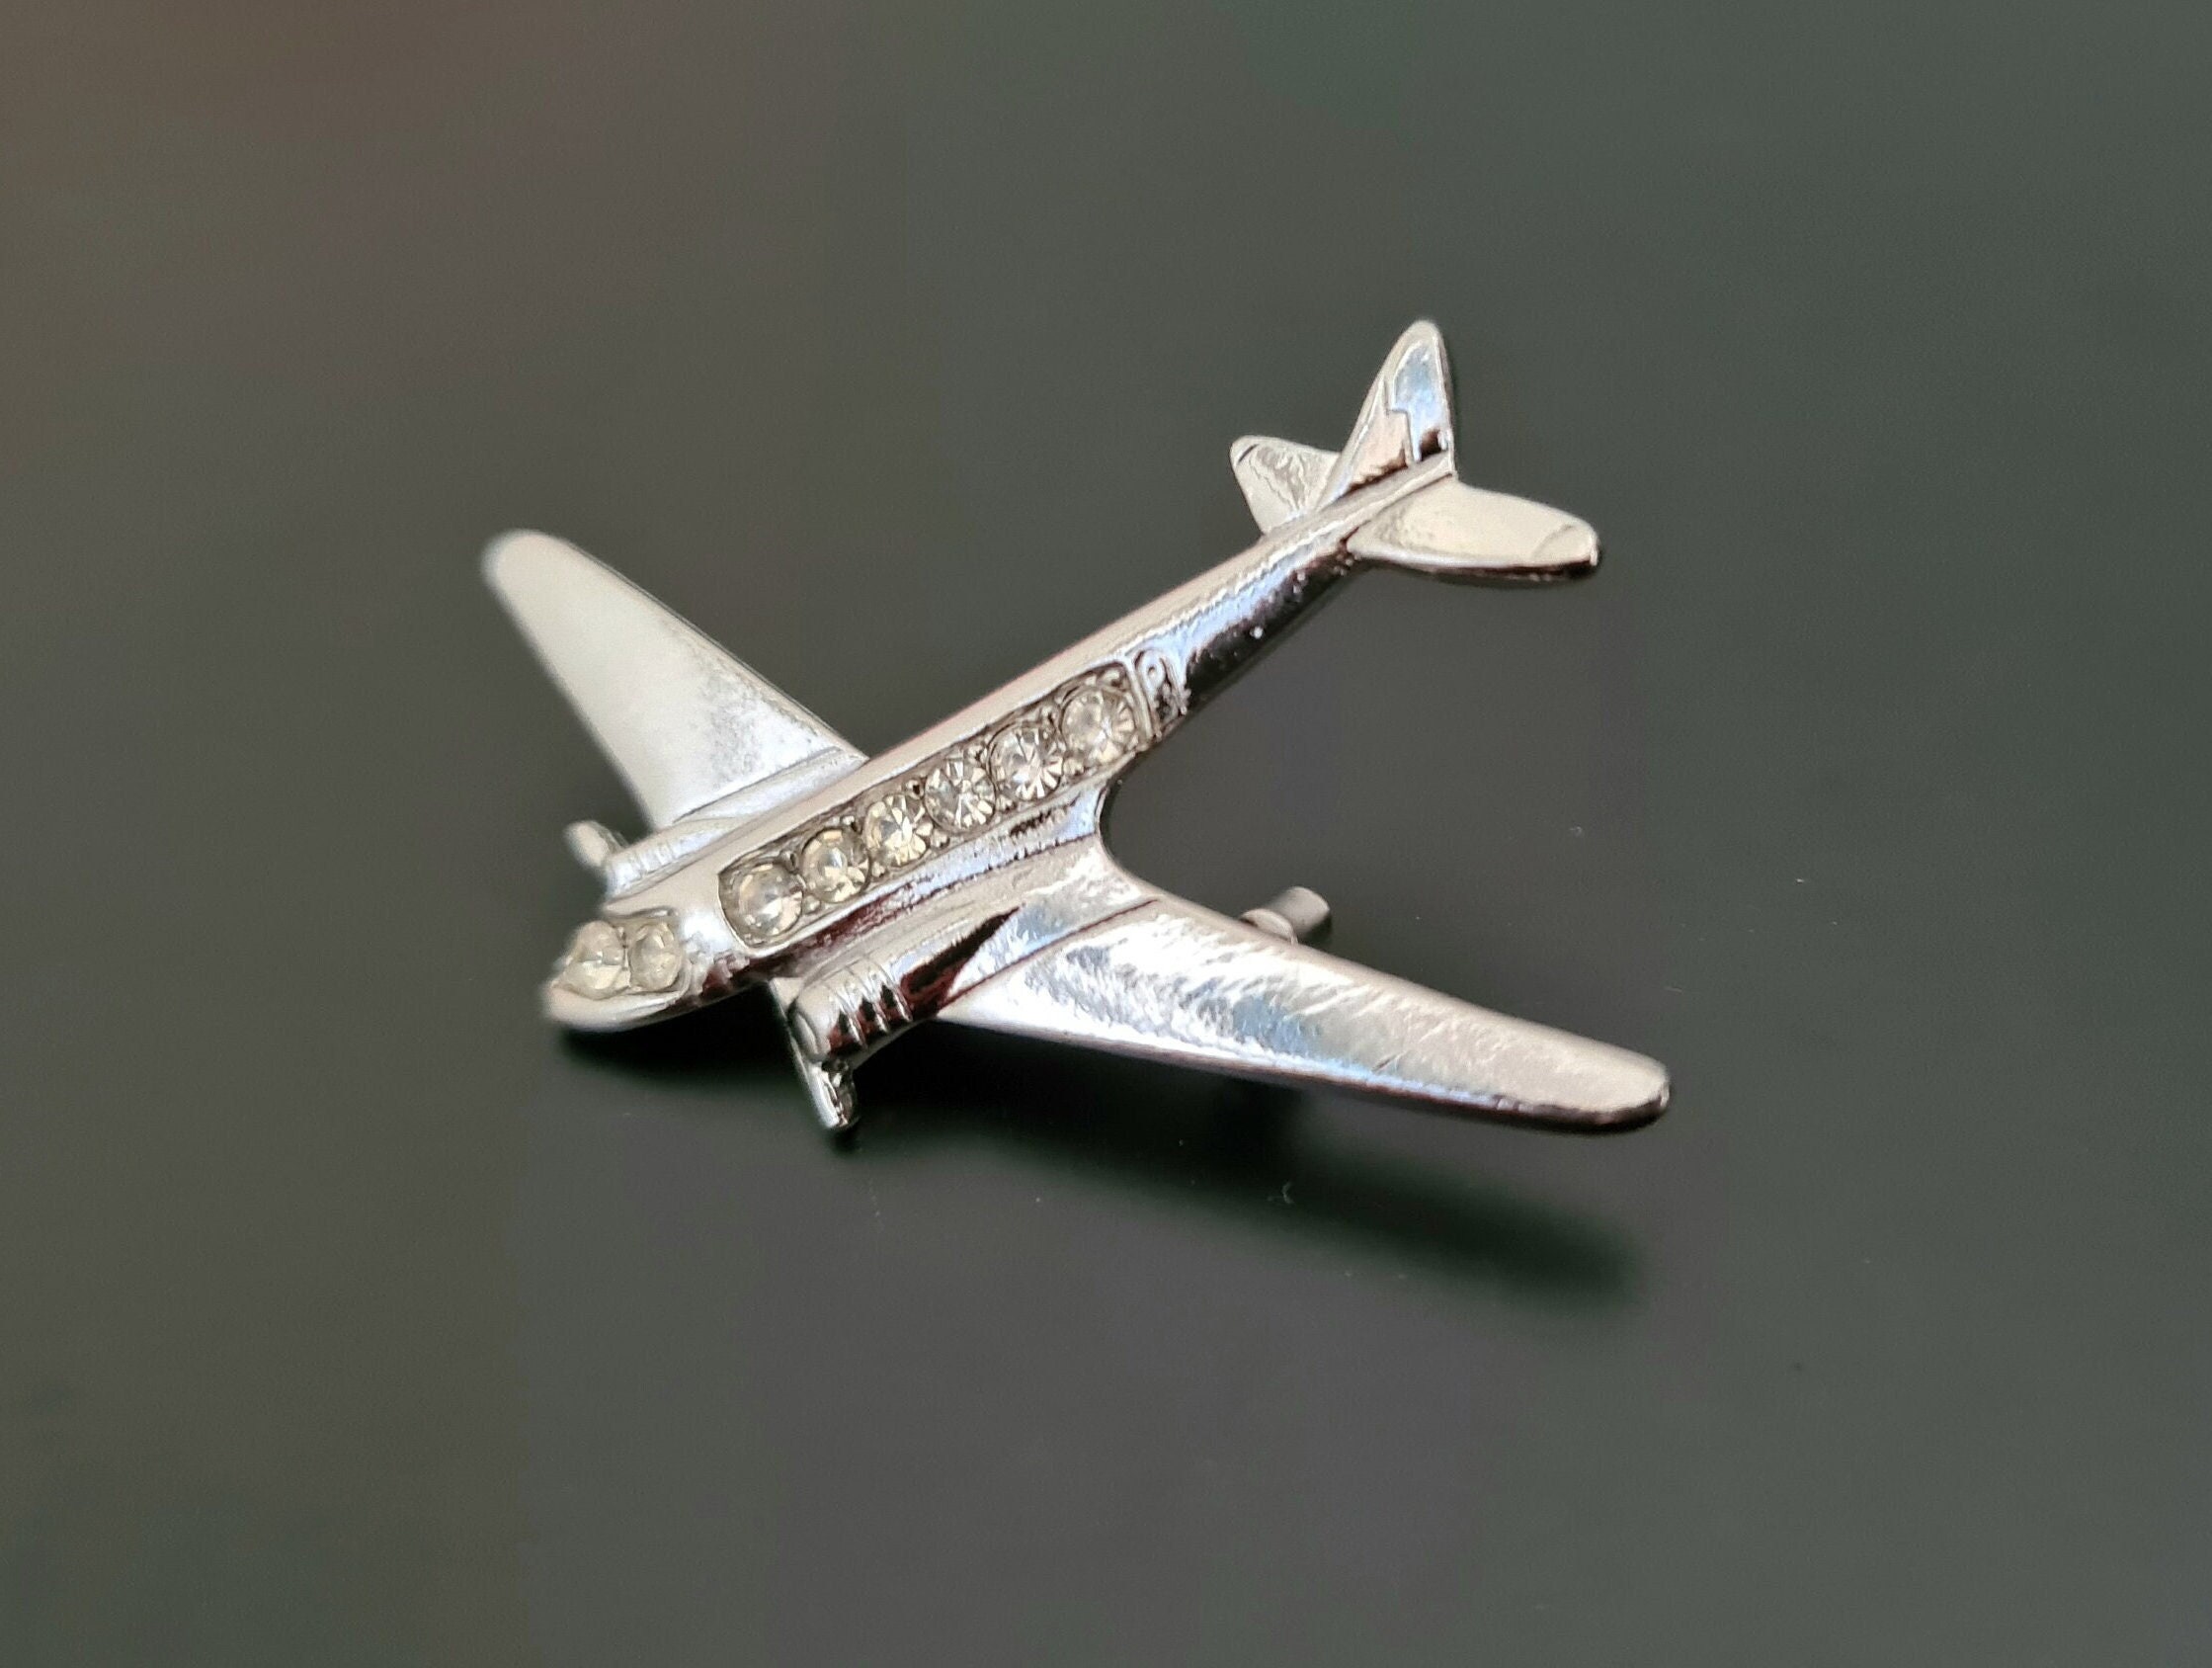 SQLang Plane Brooch Airplane Enamel Charms Jewelry Party Badge Banquet Scarf Pins Gifts 